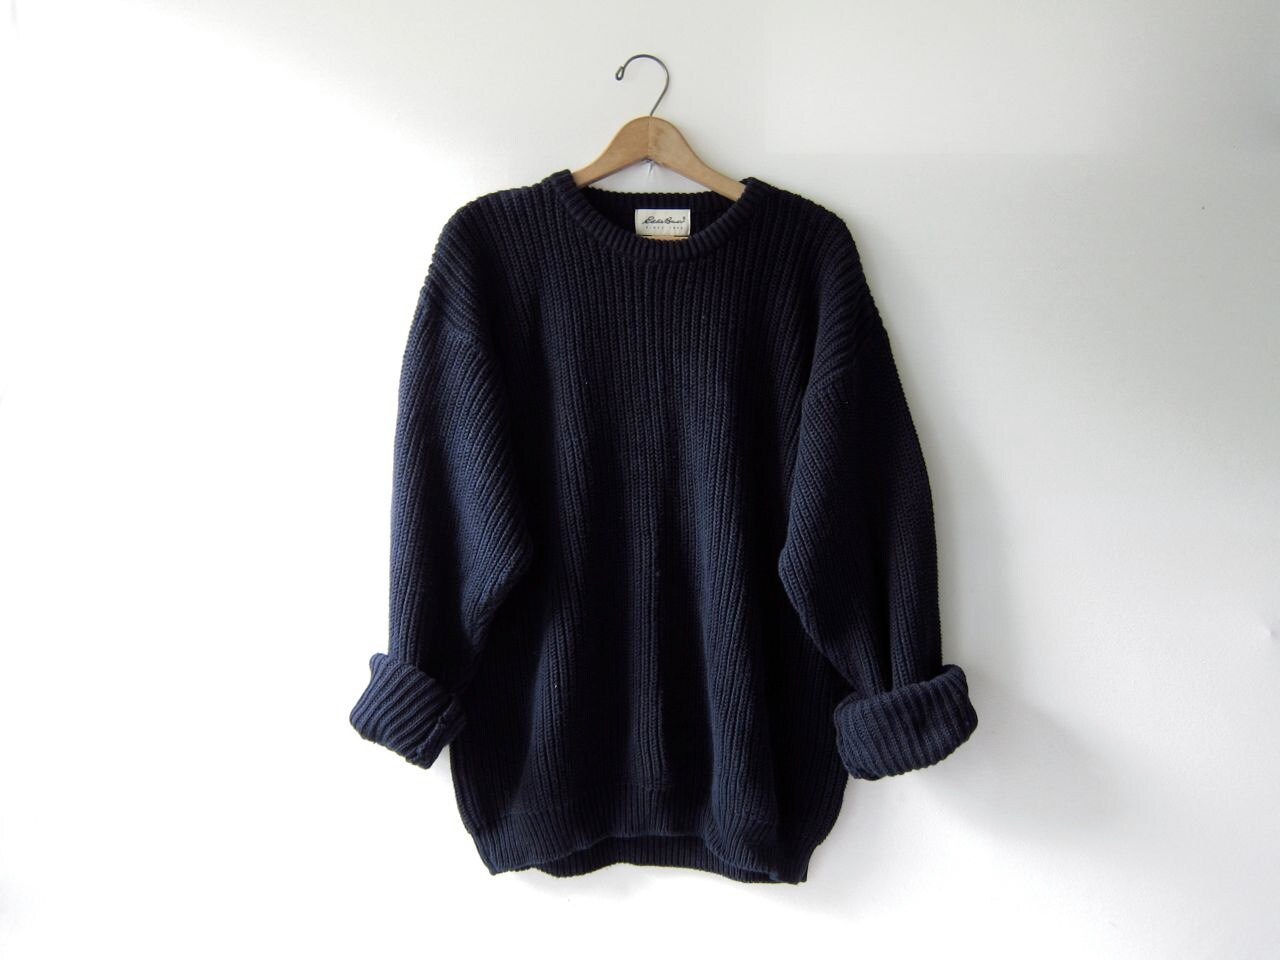 90s chunky knit sweater. loose knit by dirtybirdiesvintage on Etsy